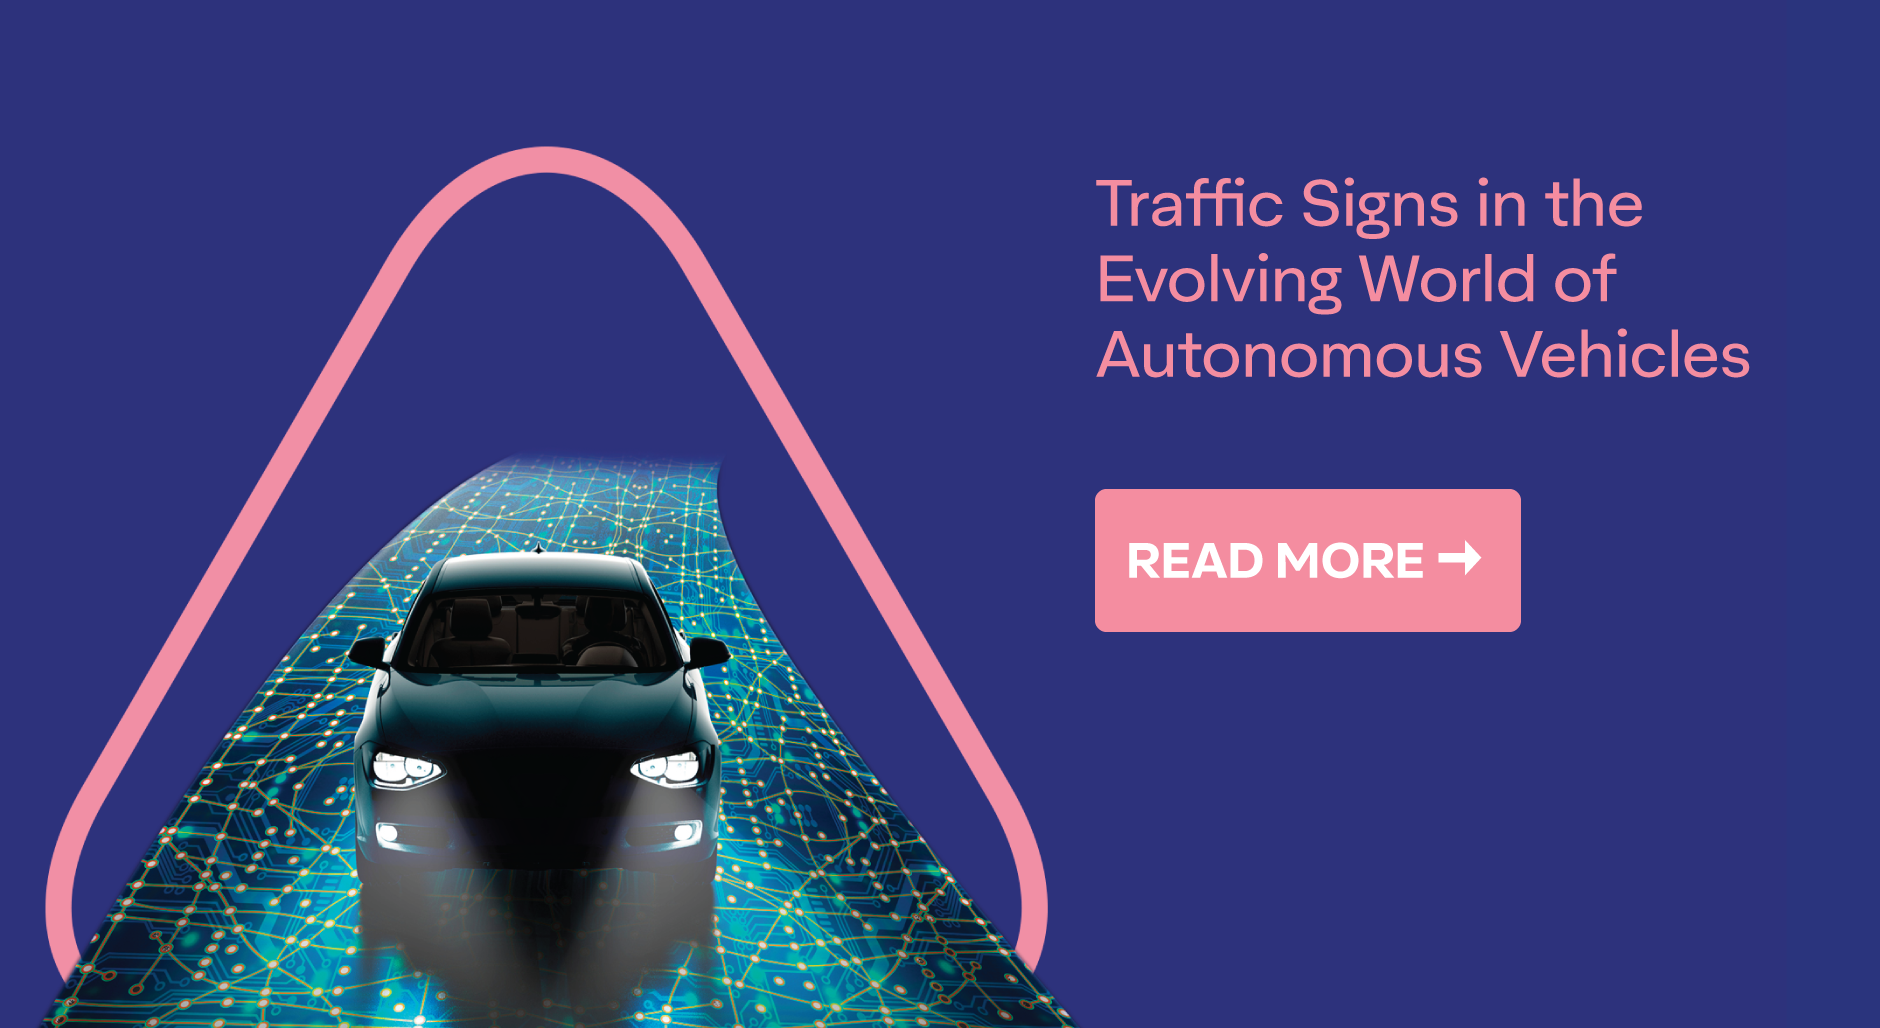 Moth-like patches on a 'STOP' sign can make autonomous driving cars